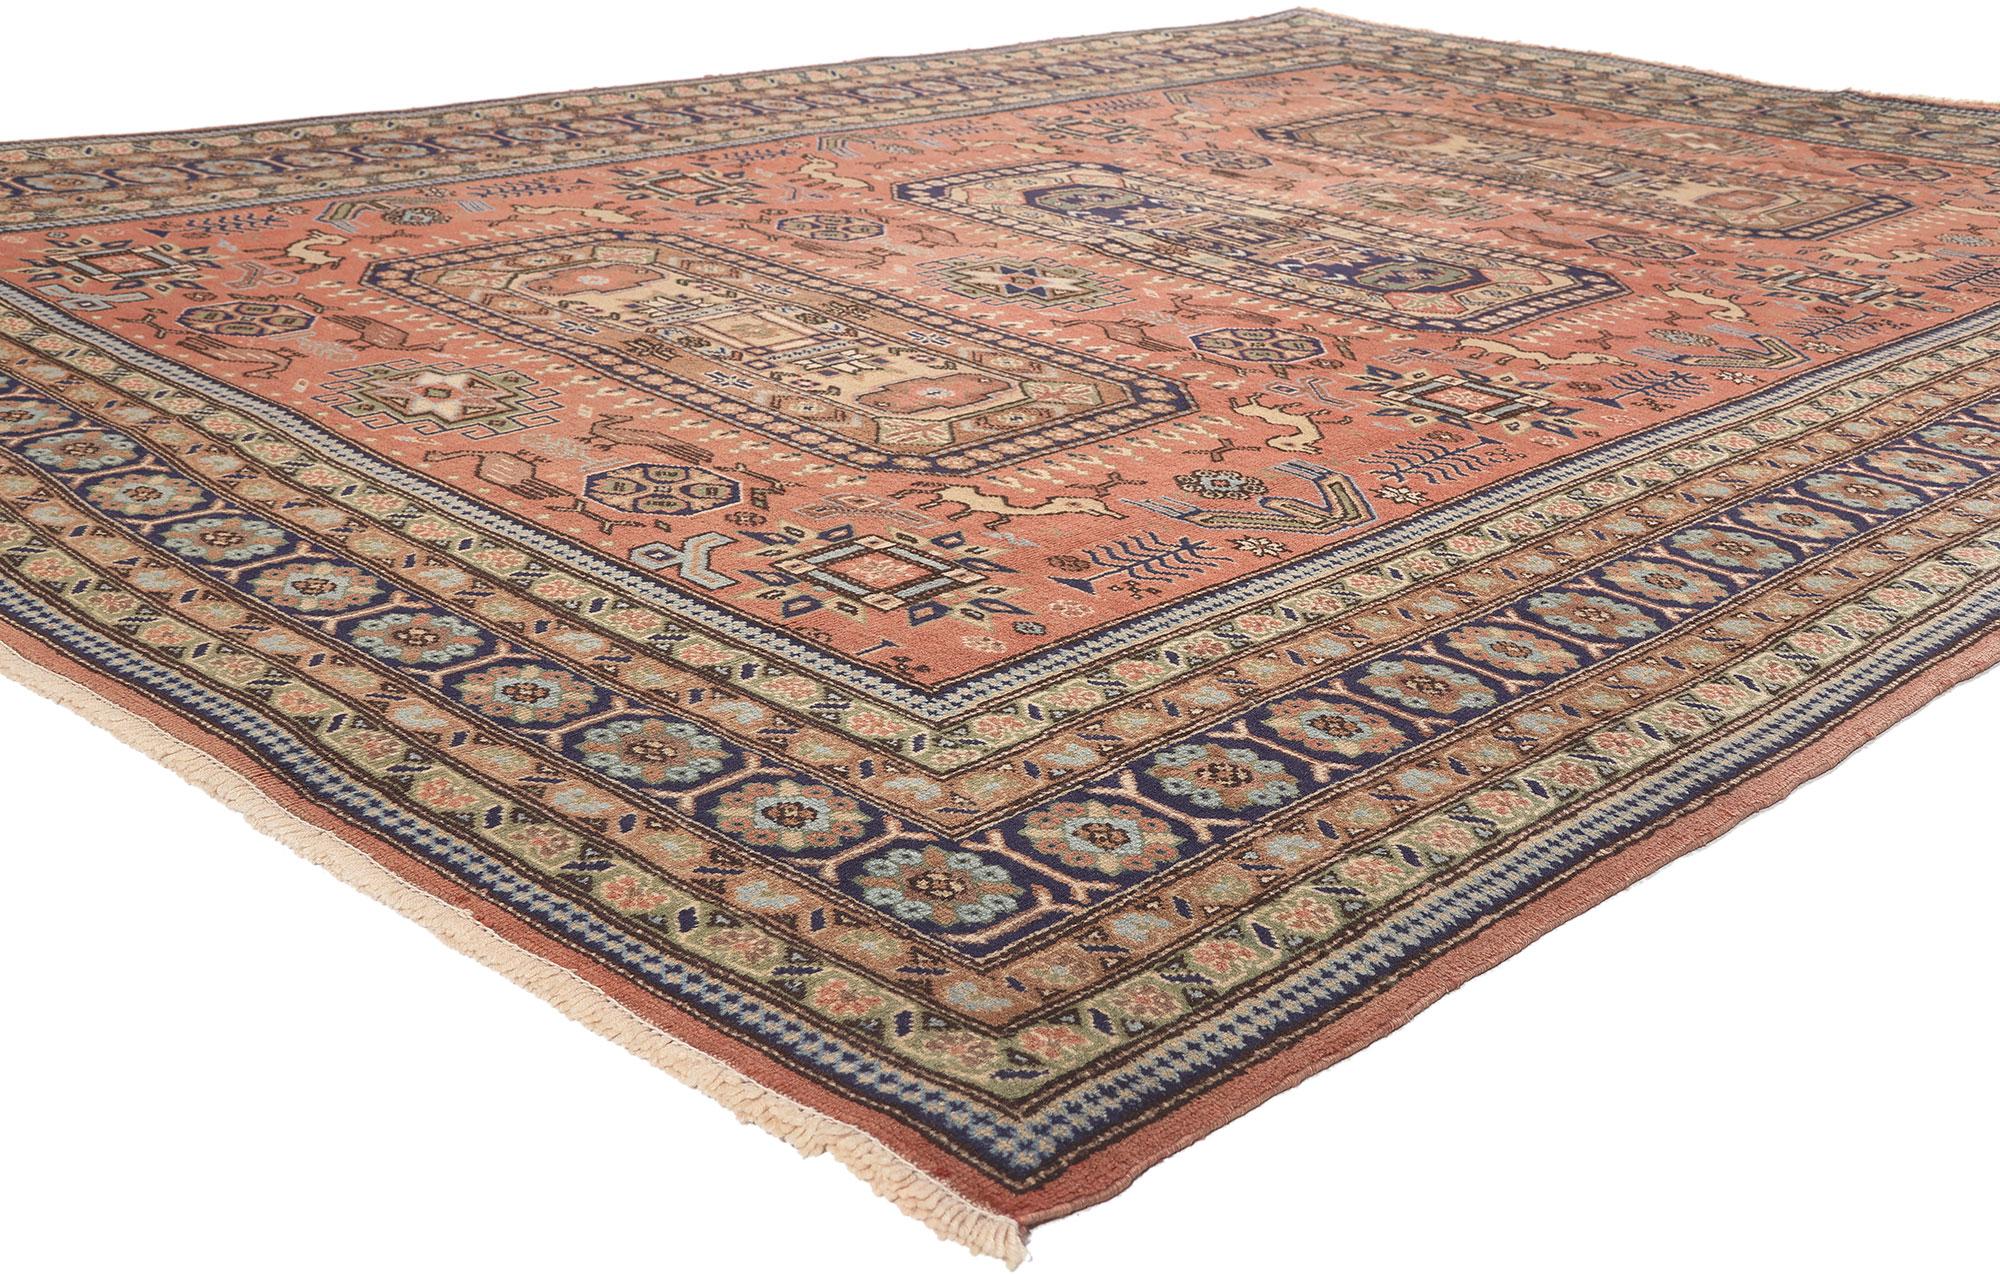 74930 Vintage Persian Ardabil Rug, 07'04 x 10'01.
Cozy nomad meets Pacific Northwest style in this hand knotted wool vintage Persian Ardabil rug. The fascinating Caucasian designs and nature-inspired color palette woven into this piece work together